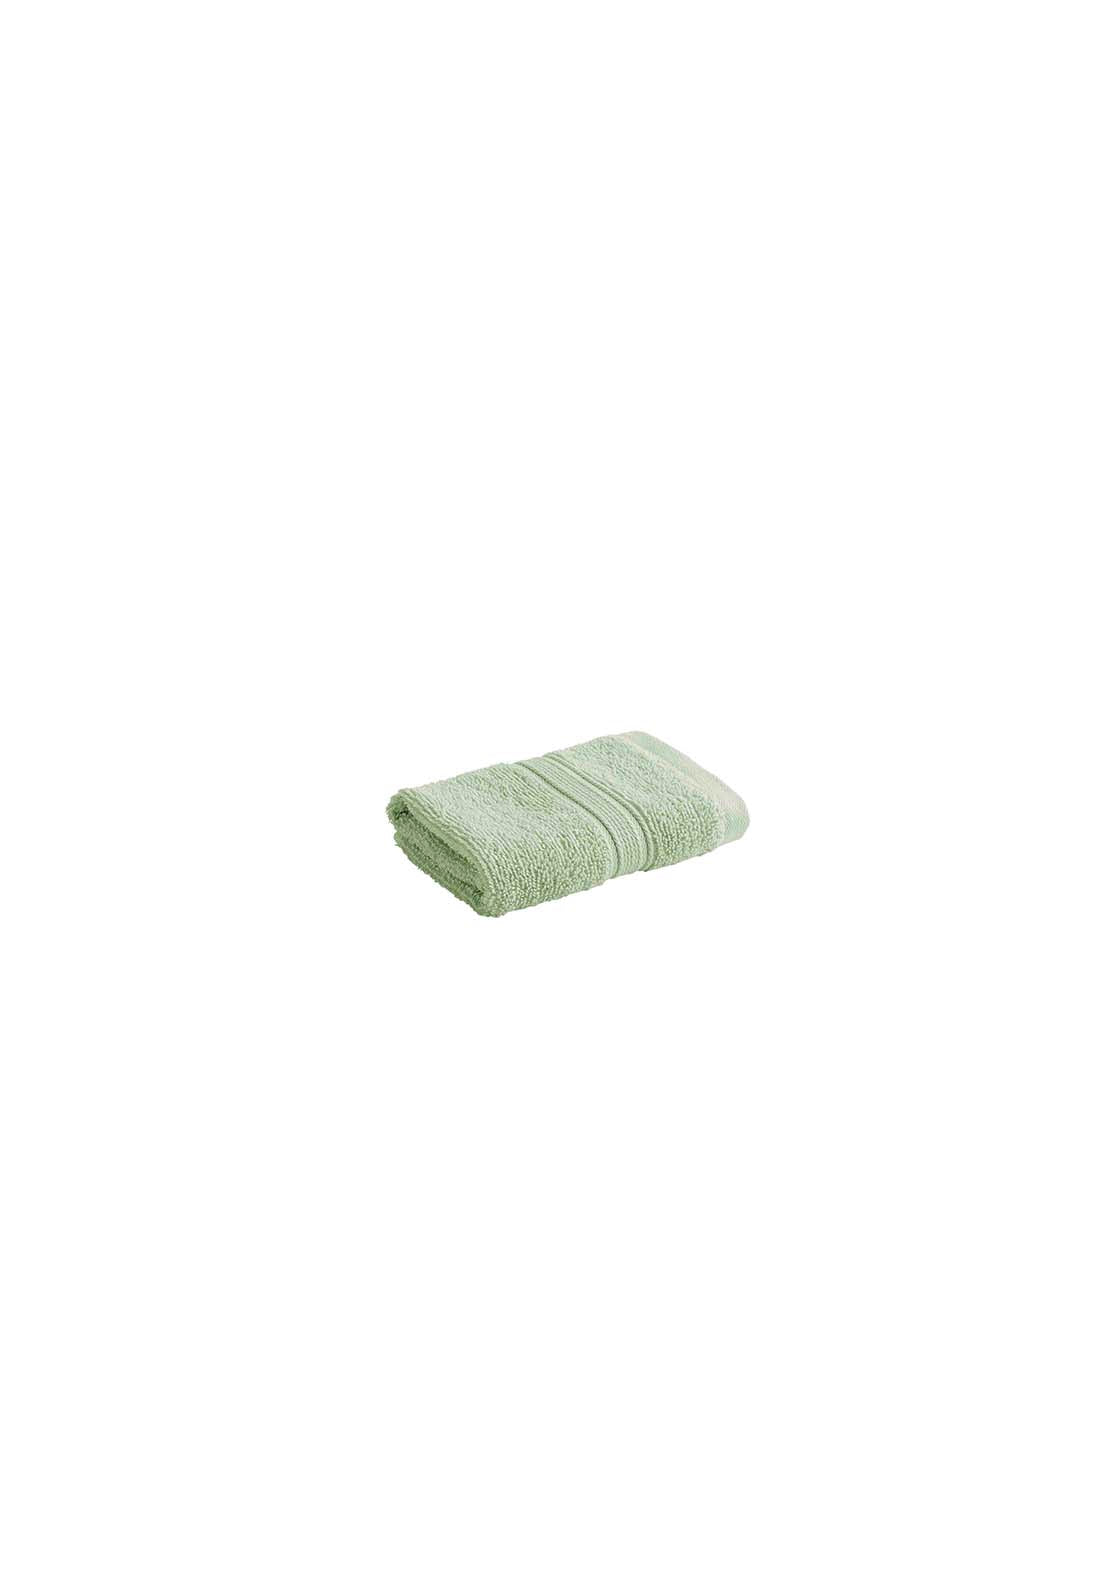 Christy Serene Face Cloth - Cucumber 1 Shaws Department Stores